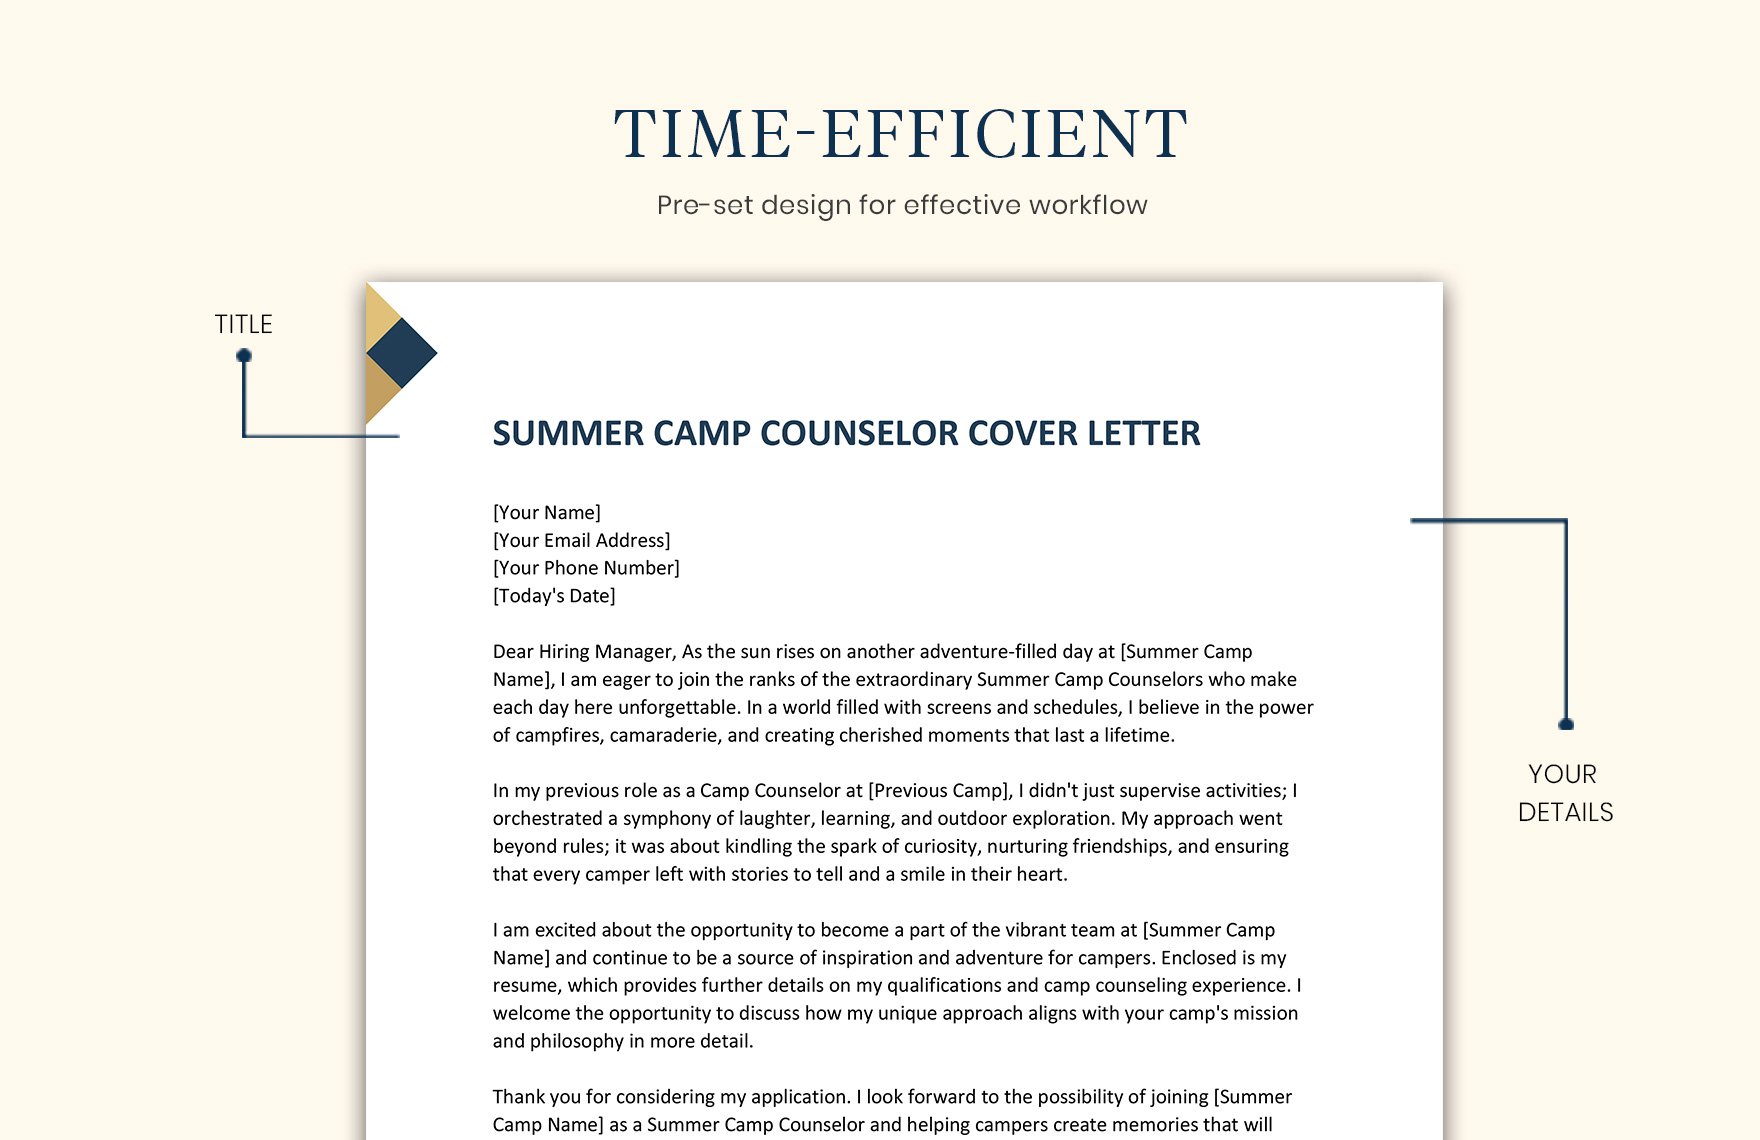 Summer Camp Counselor Cover Letter